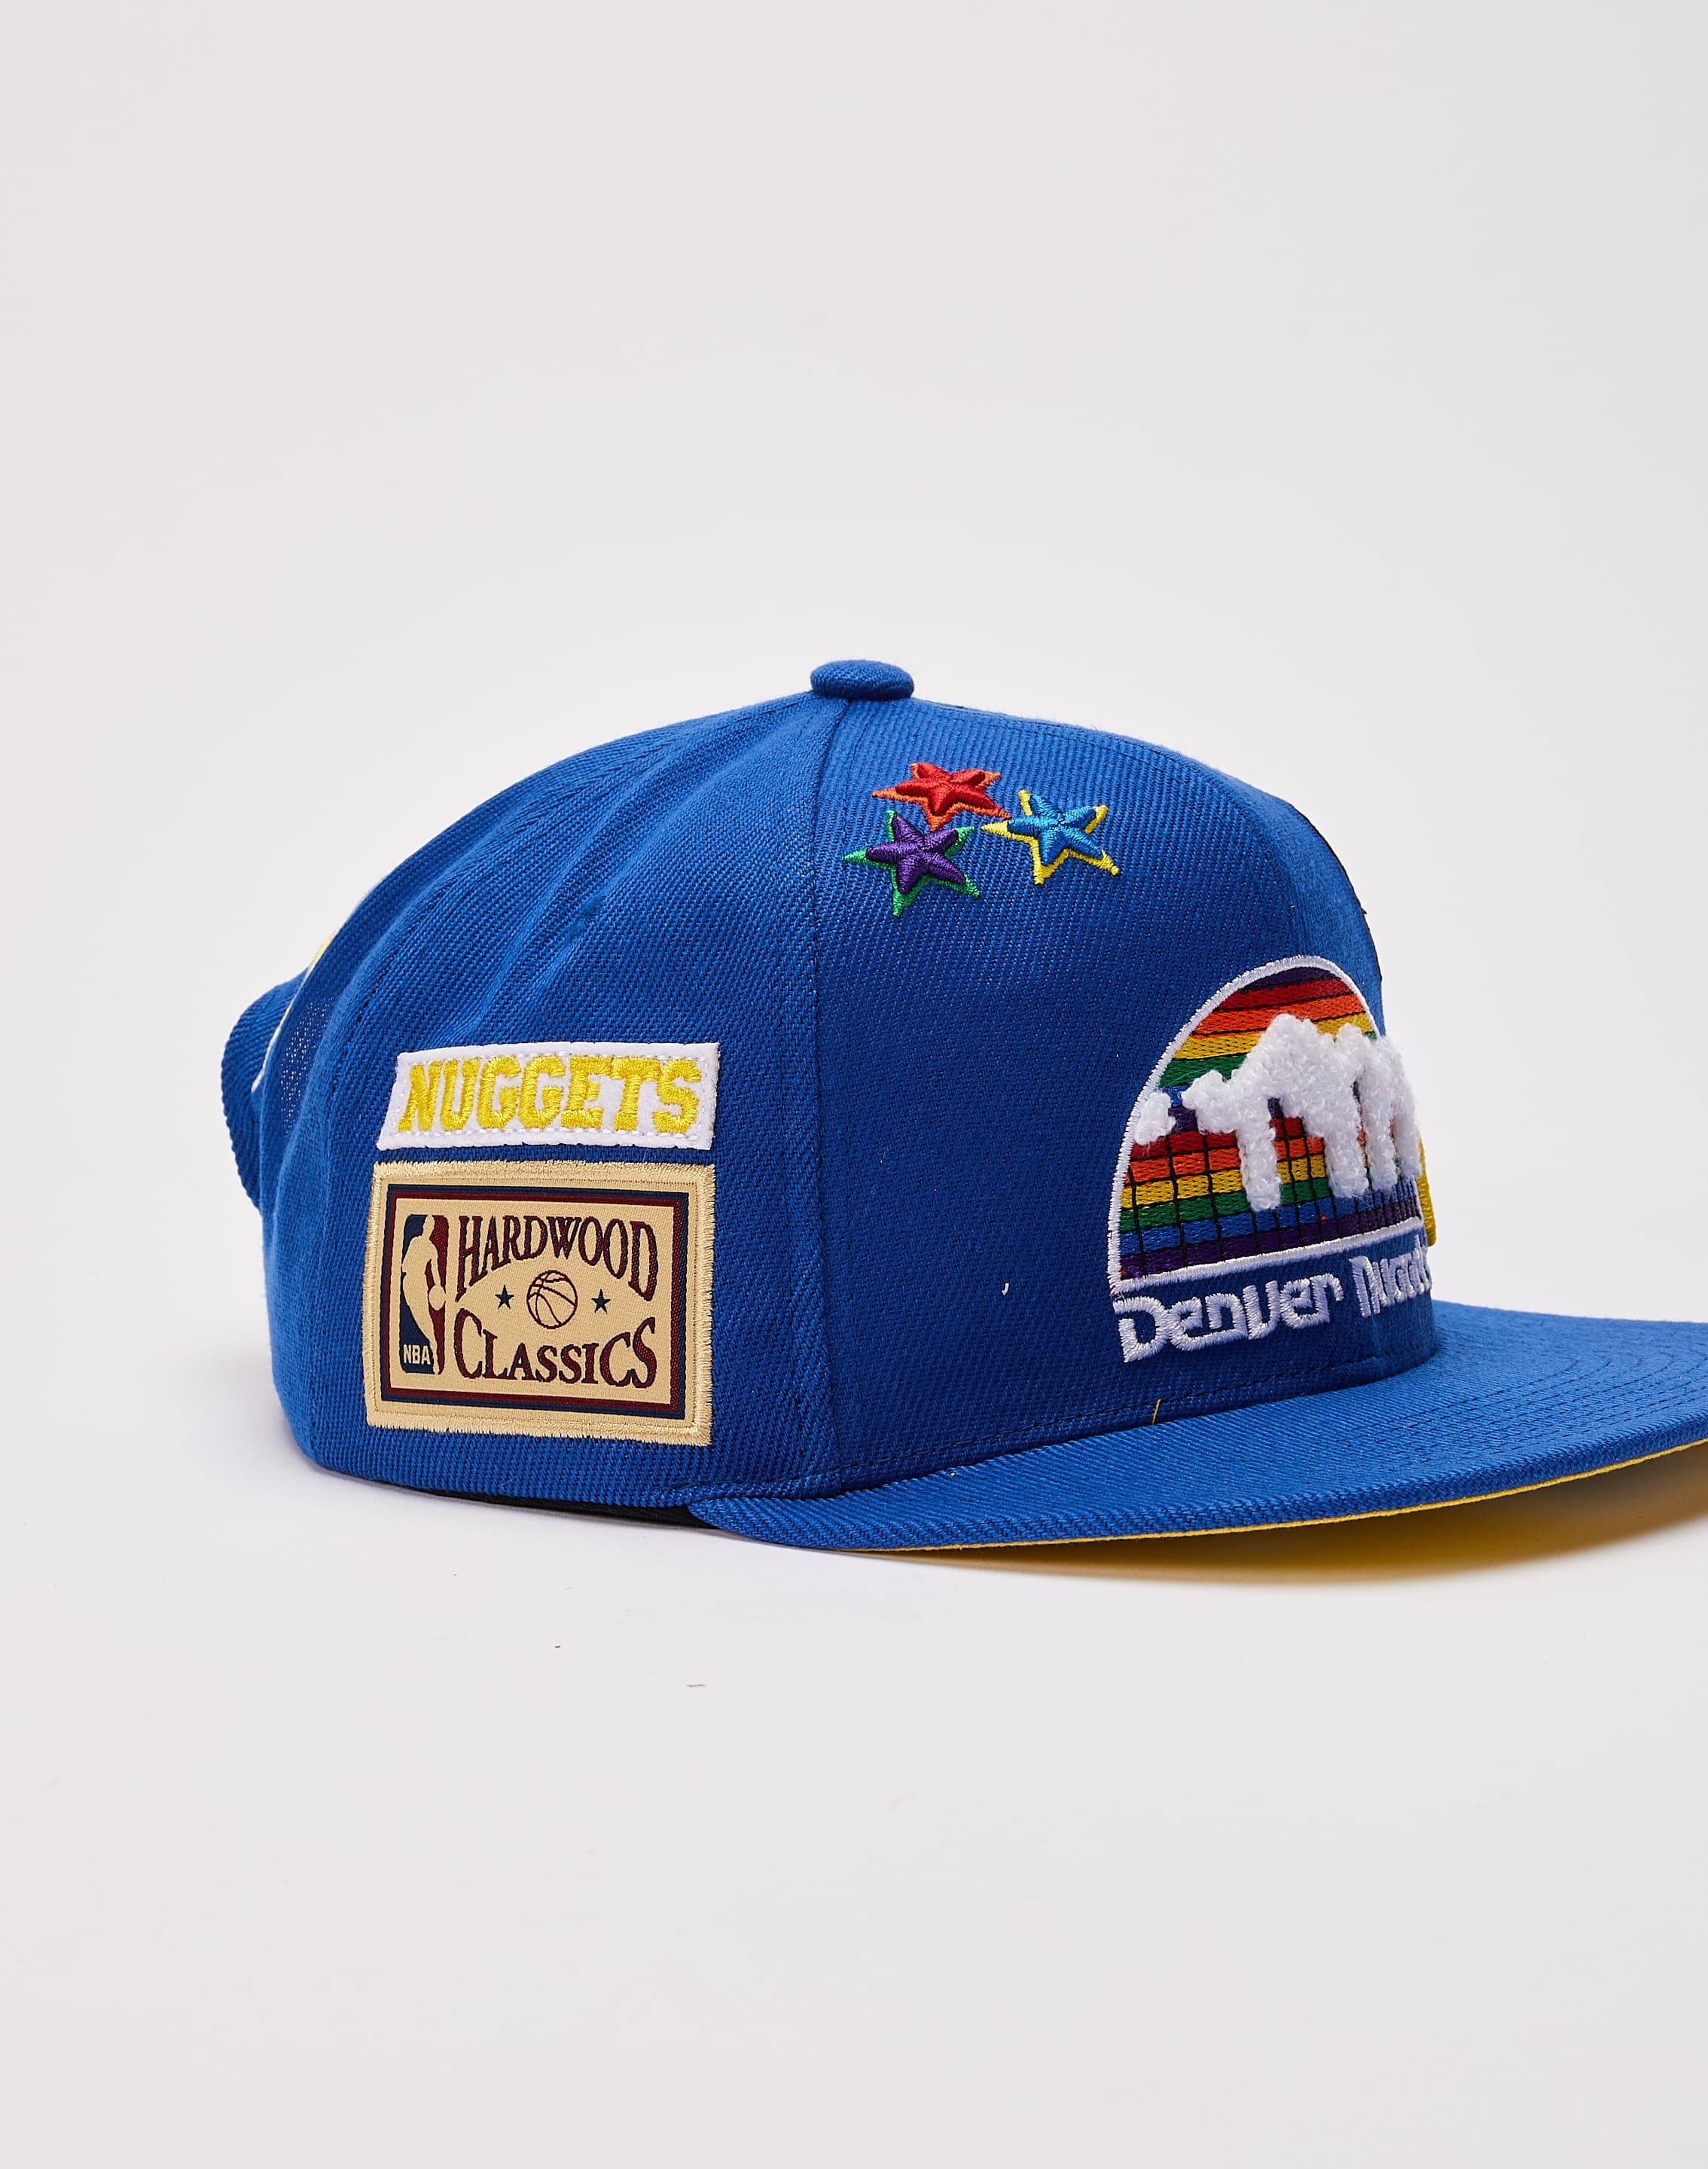 MITCHELL & NESS: BAGS AND ACCESSORIES, MITCHELL AND NESS DENVER